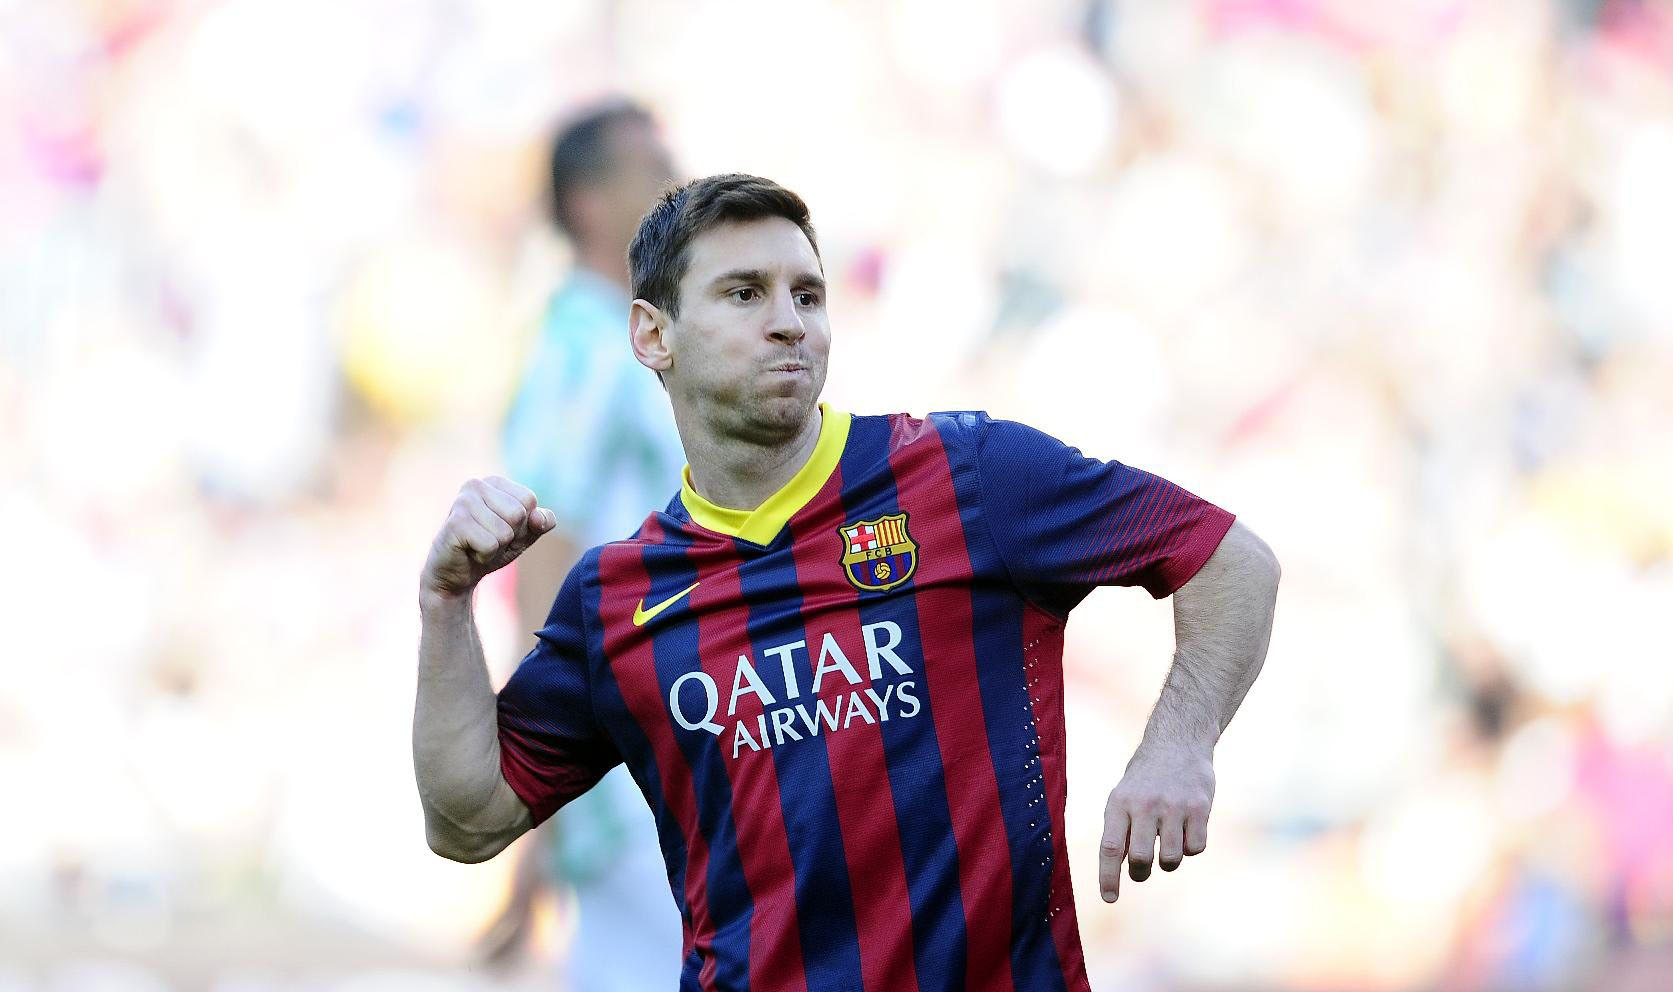 Lionel Messi can't stop scoring